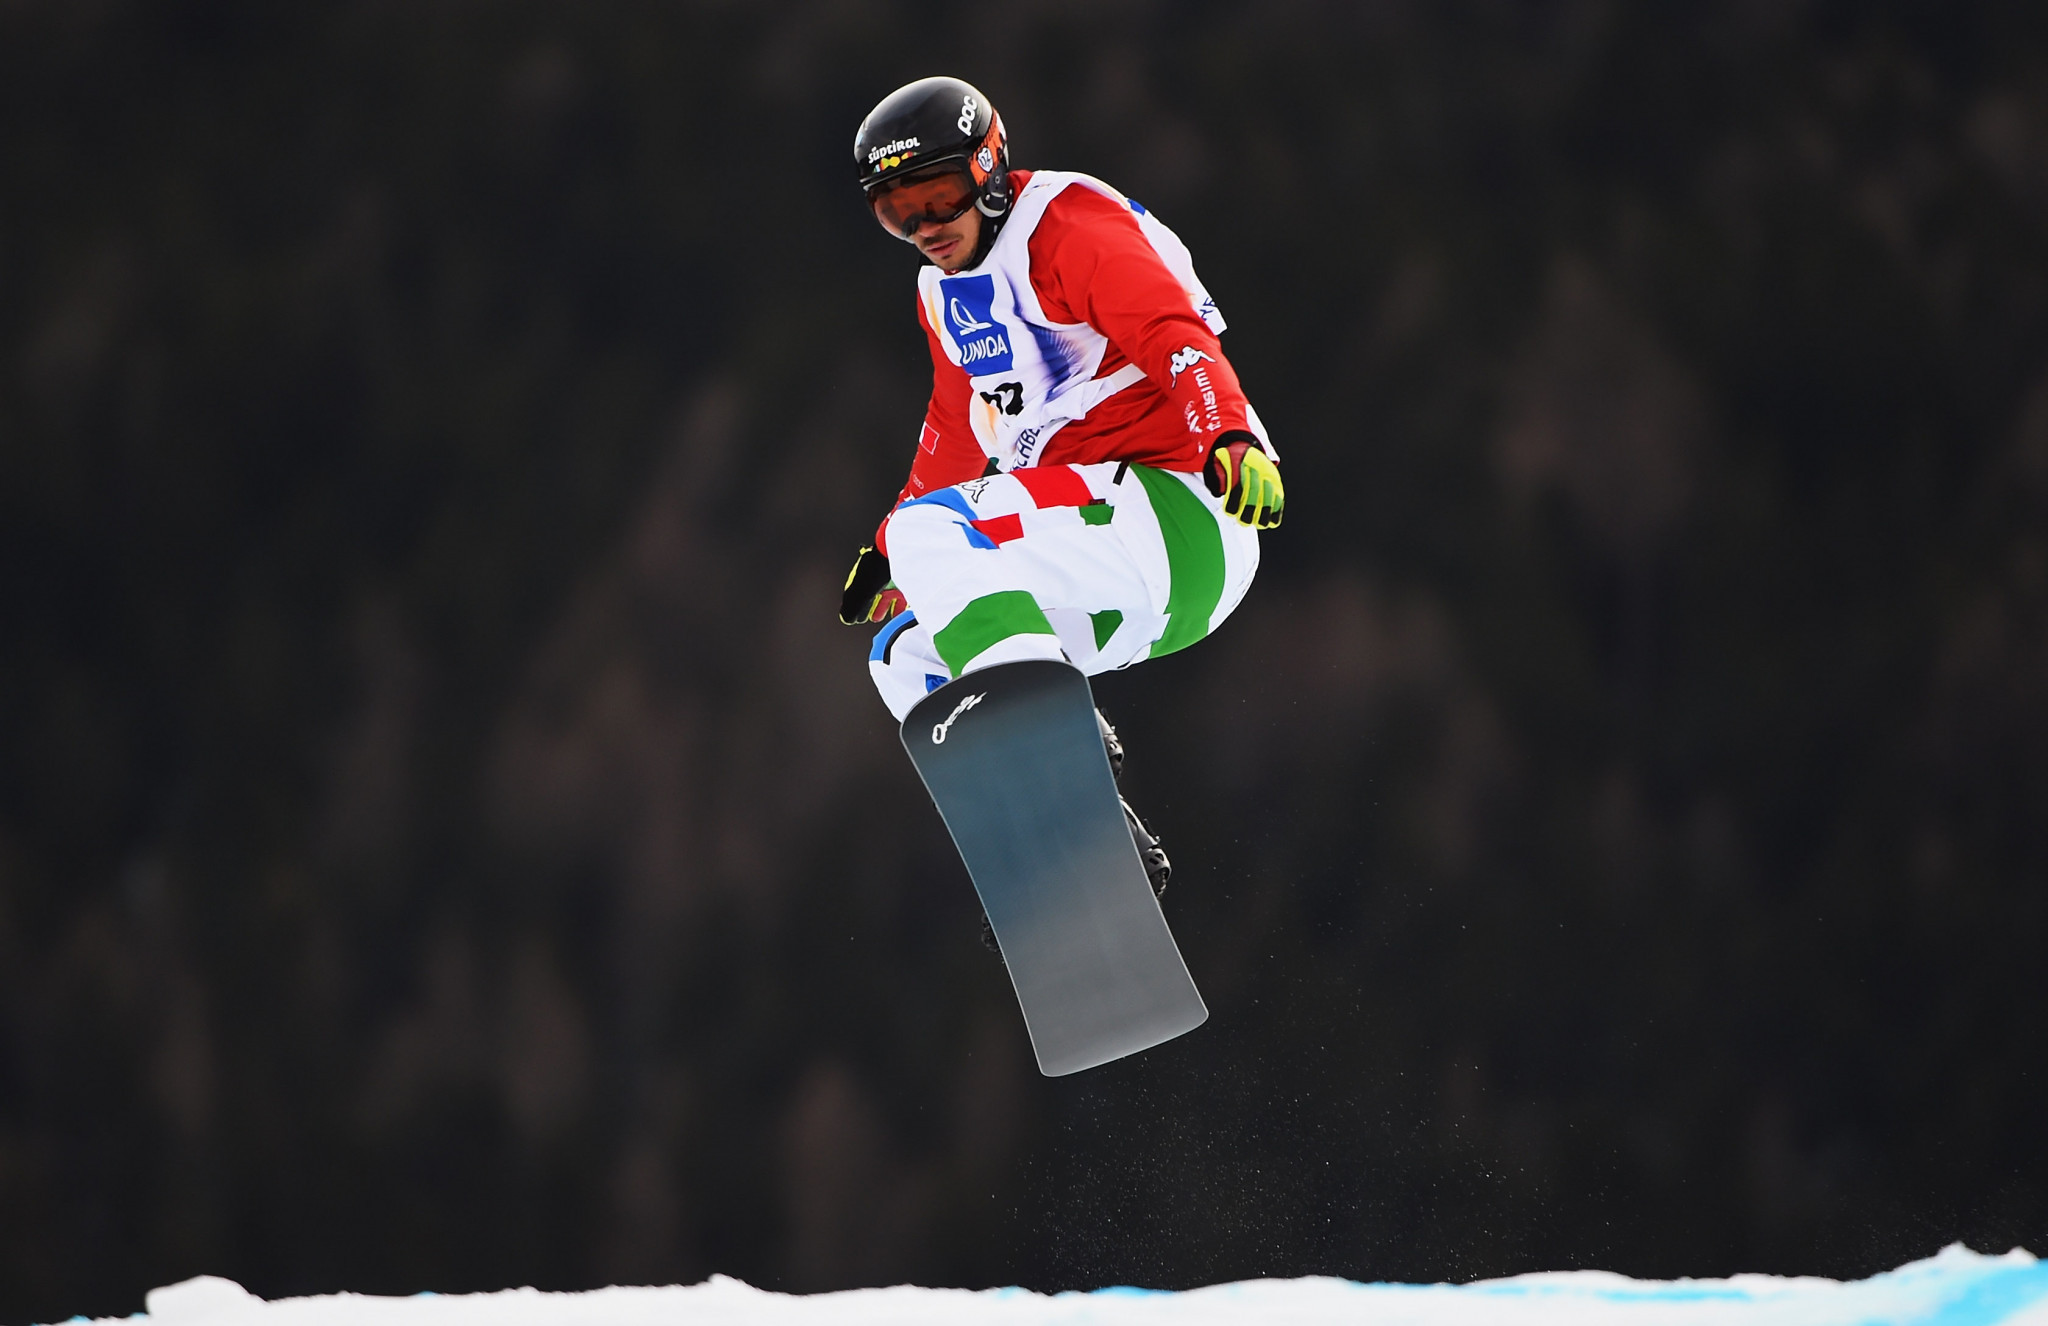 Home favourites Visintin and Moili top FIS Snowboard Cross World Cup qualification in Cervinia